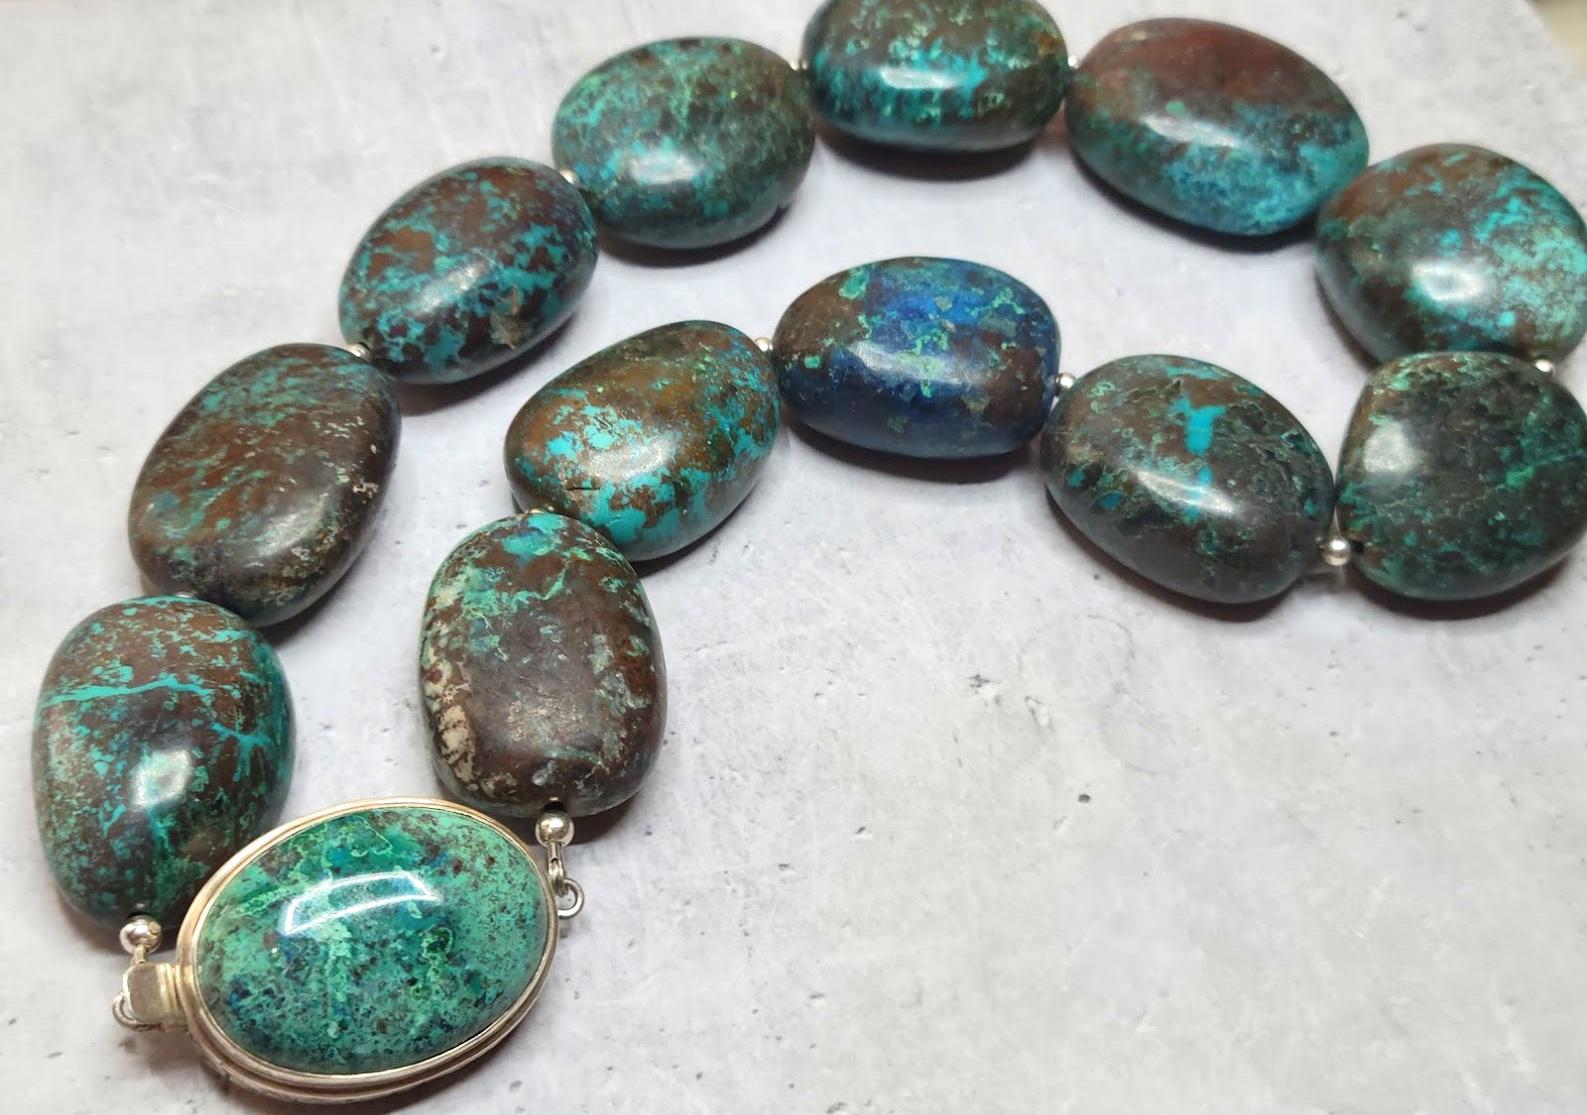 The length of the necklace is 18 inches (45.7 cm). The size of the beads varies from 32 to 36 mm.
Amazing genuine chrysocolla from Arizona Copper Mine, not treated in any way. The beautiful smooth matte finish on these rare large-high-quality beads.